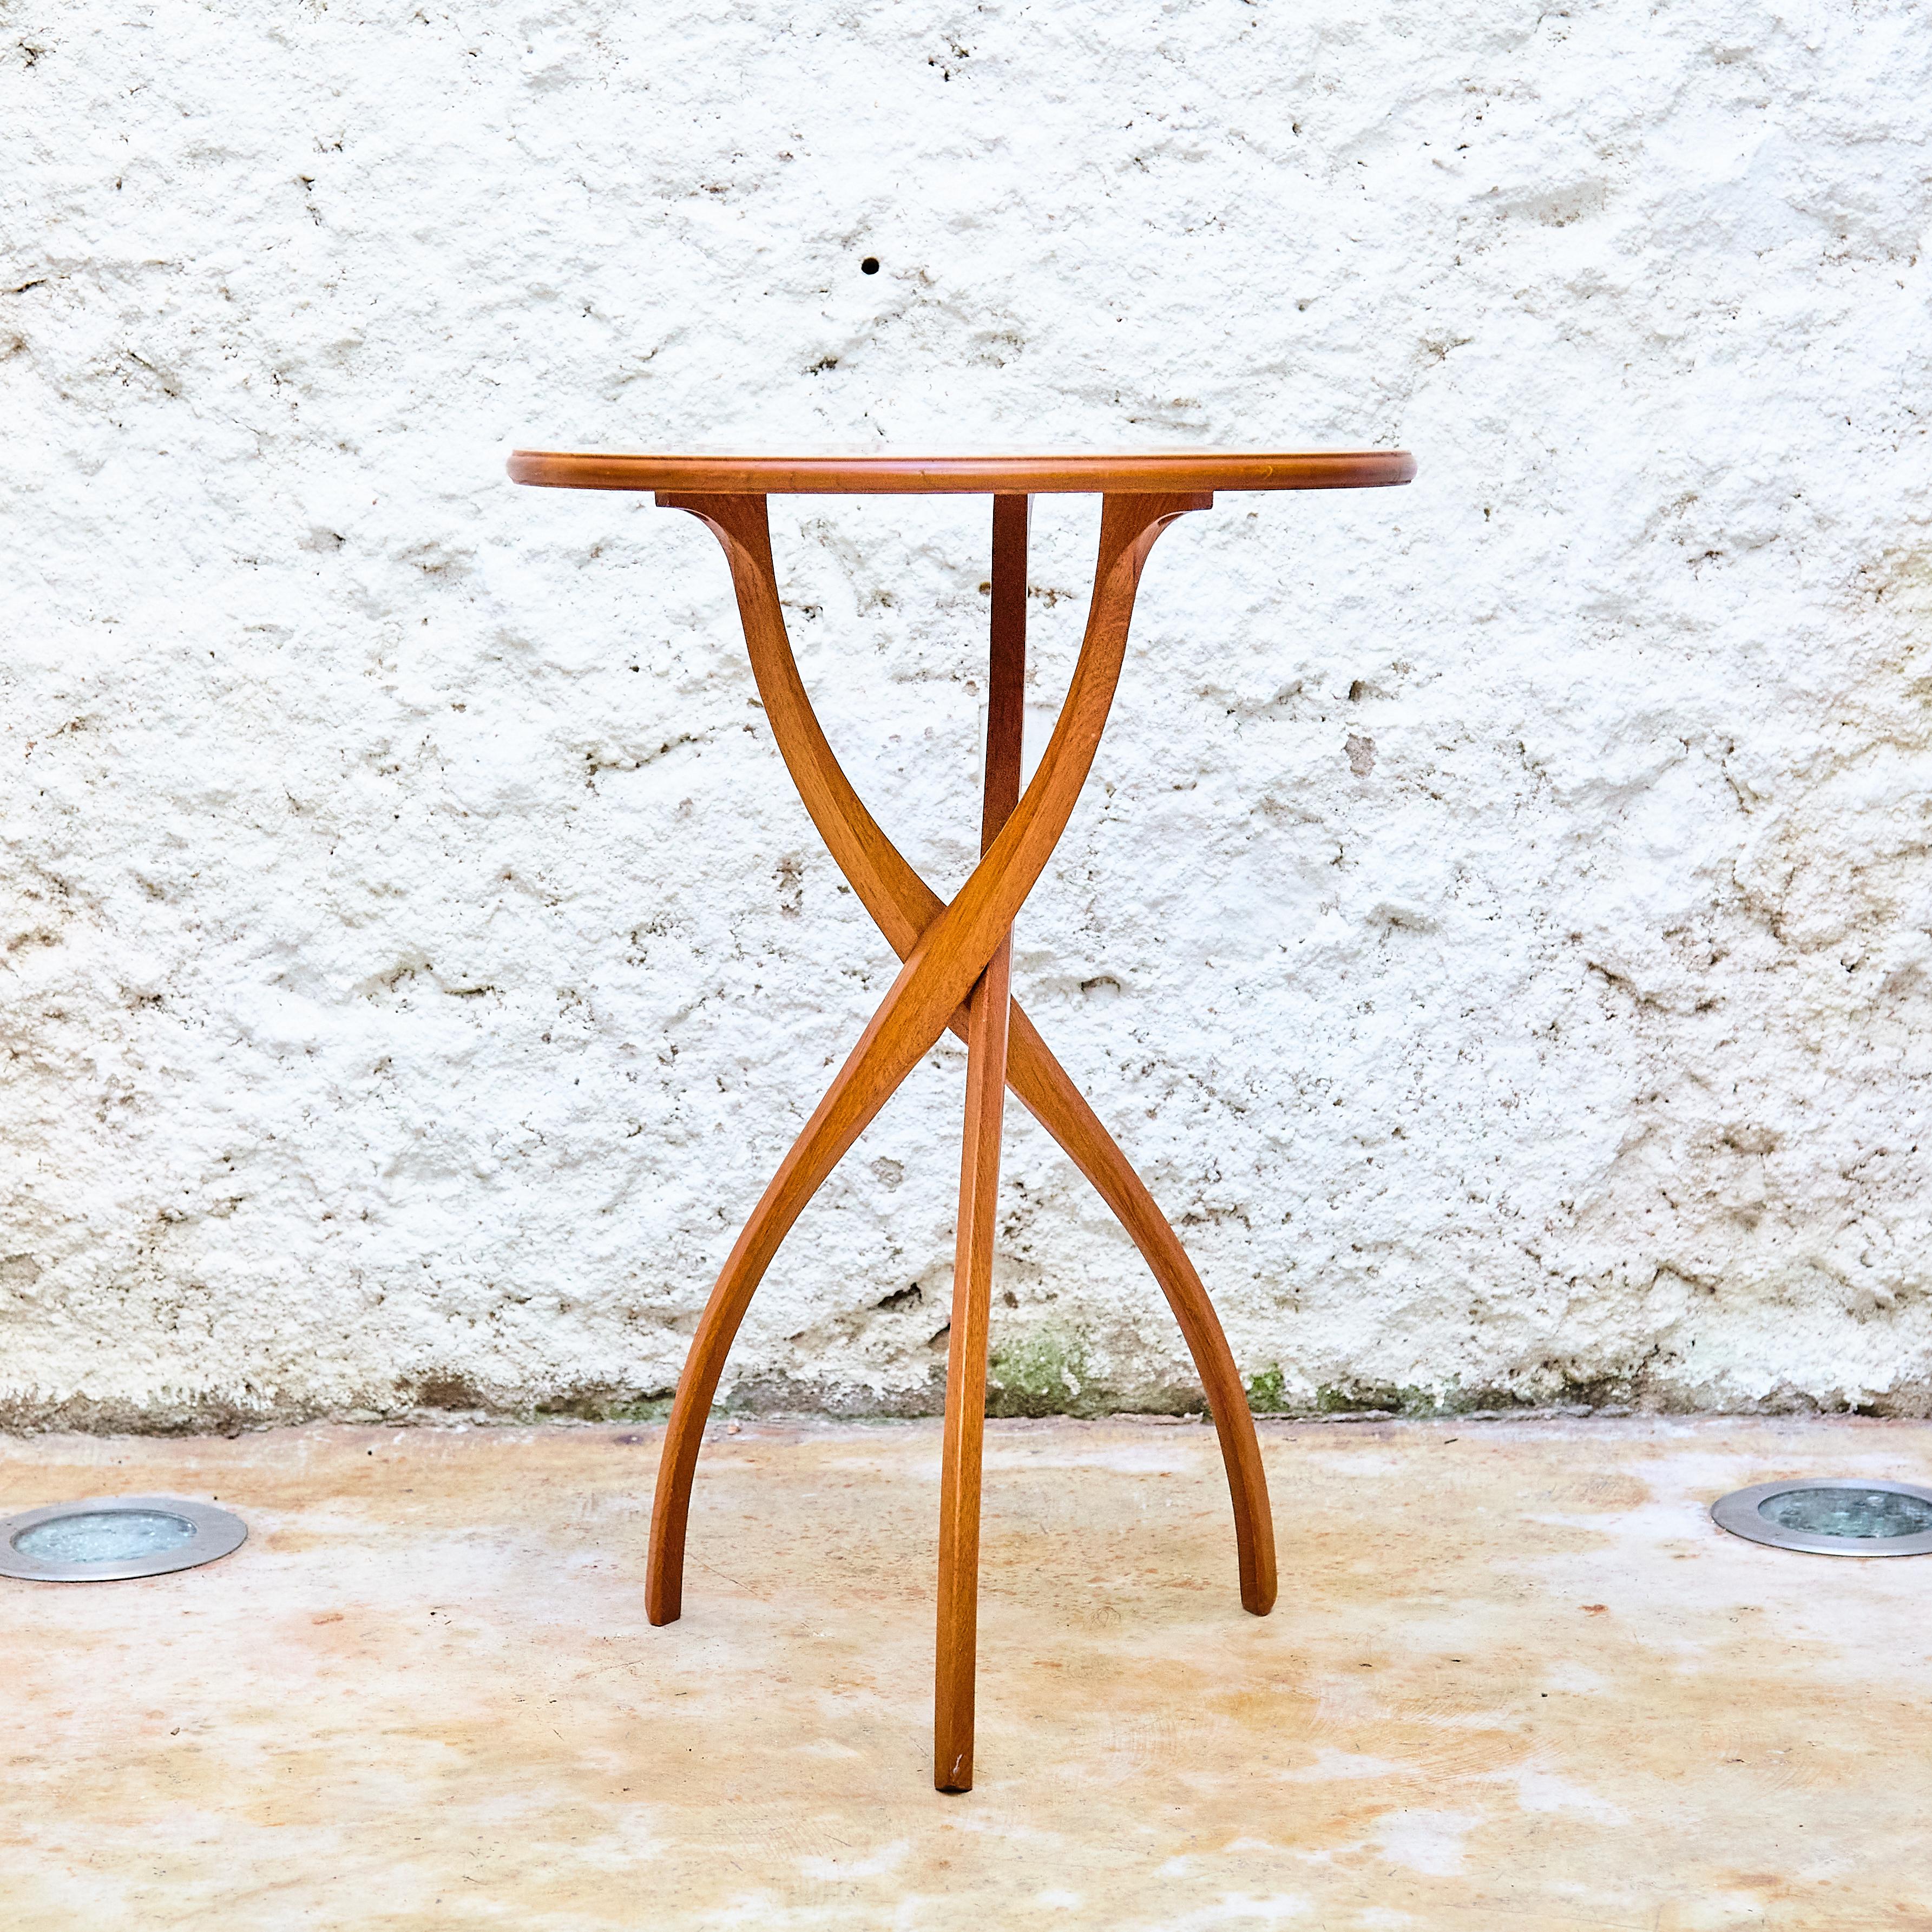 Wood side table 'Vortice' by Oscar Tusquets for Carlos Jané, circa 1989.

Manufactured in Spain, circa 1989.

In original condition with minor wear consistent of age and use, preserving a beautiful patina.

Materials: 
Wood

Dimensions: